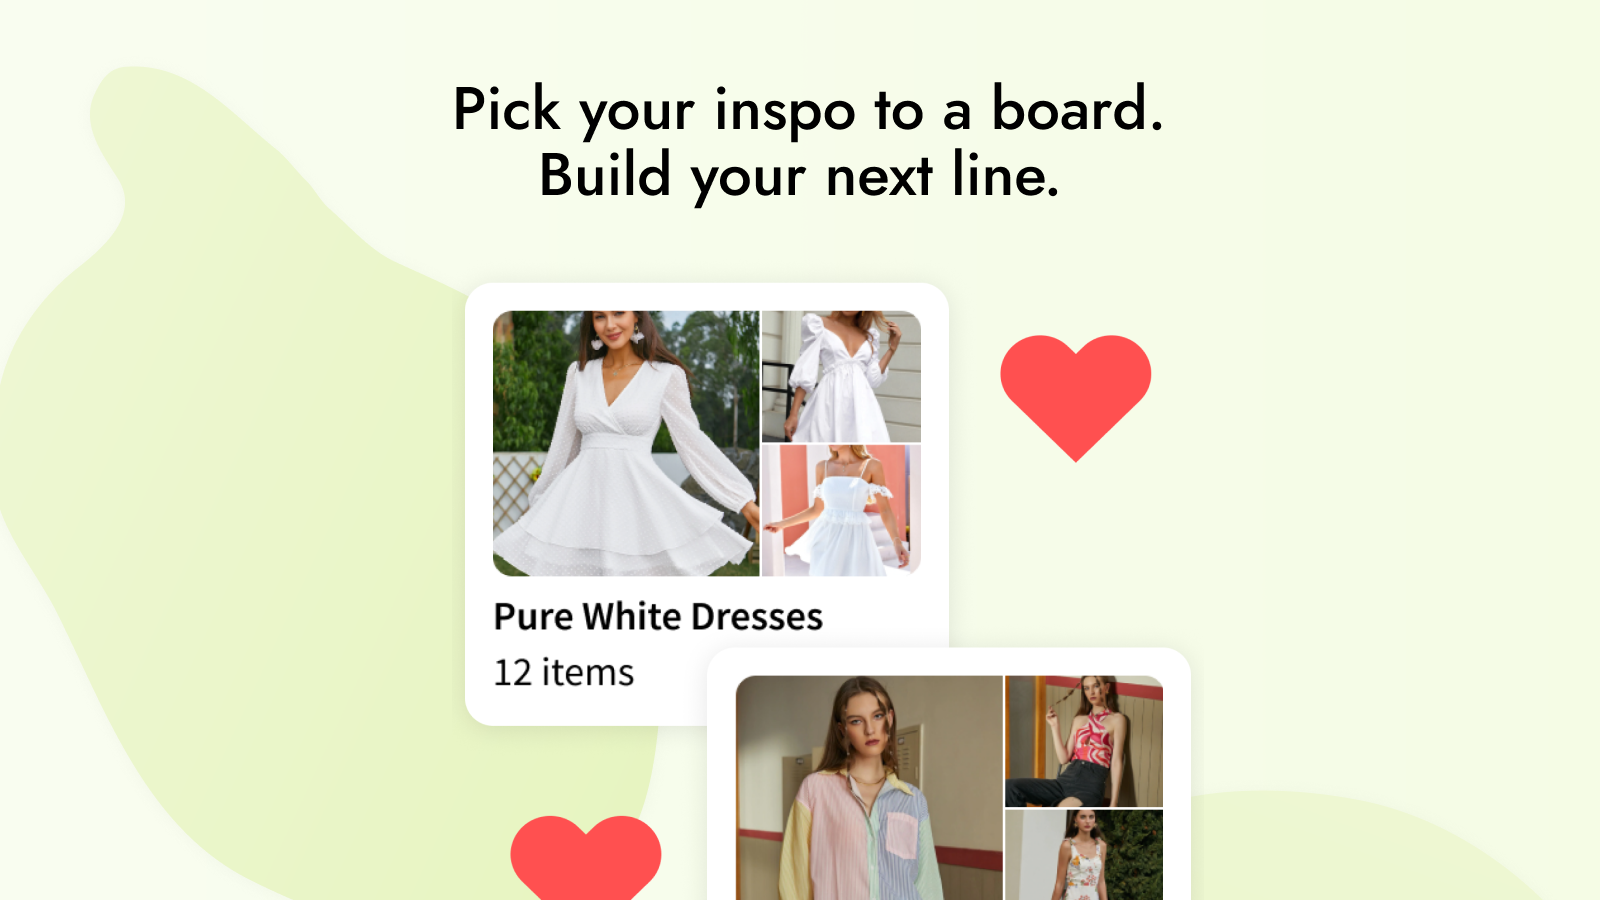 Pick your inspo on mobile! 